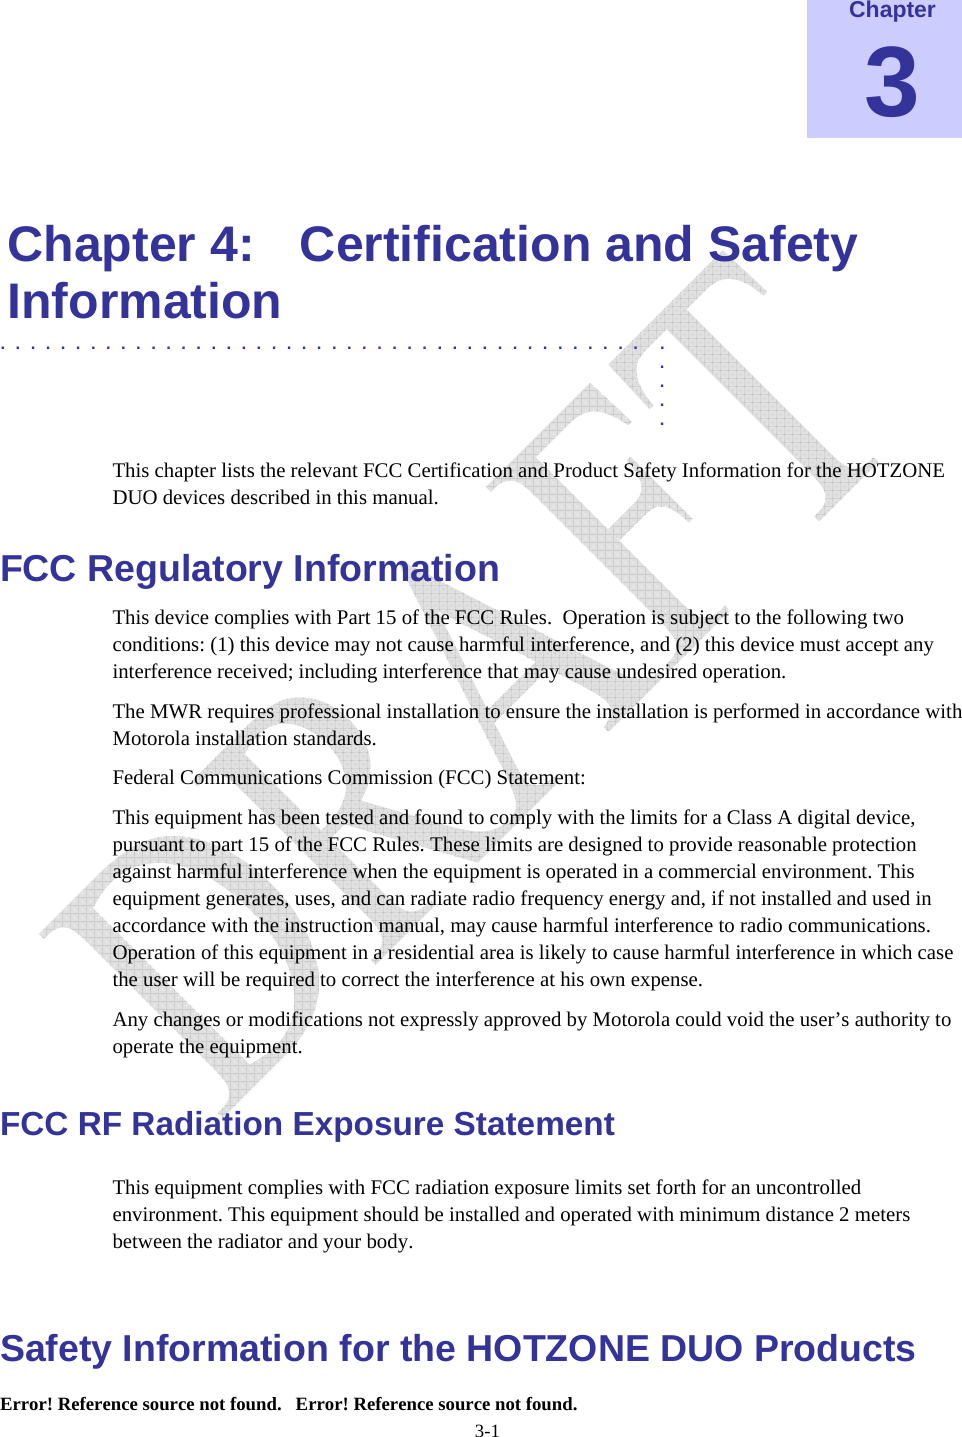  Error! Reference source not found.   Error! Reference source not found. 3-1 Chapter 3  Chapter 4:  Certification and Safety Information ........................................... .  .  .  .  . This chapter lists the relevant FCC Certification and Product Safety Information for the HOTZONE DUO devices described in this manual. FCC Regulatory Information This device complies with Part 15 of the FCC Rules.  Operation is subject to the following two conditions: (1) this device may not cause harmful interference, and (2) this device must accept any interference received; including interference that may cause undesired operation. The MWR requires professional installation to ensure the installation is performed in accordance with Motorola installation standards.   Federal Communications Commission (FCC) Statement: This equipment has been tested and found to comply with the limits for a Class A digital device, pursuant to part 15 of the FCC Rules. These limits are designed to provide reasonable protection against harmful interference when the equipment is operated in a commercial environment. This equipment generates, uses, and can radiate radio frequency energy and, if not installed and used in accordance with the instruction manual, may cause harmful interference to radio communications. Operation of this equipment in a residential area is likely to cause harmful interference in which case the user will be required to correct the interference at his own expense.  Any changes or modifications not expressly approved by Motorola could void the user’s authority to operate the equipment. FCC RF Radiation Exposure Statement This equipment complies with FCC radiation exposure limits set forth for an uncontrolled environment. This equipment should be installed and operated with minimum distance 2 meters      between the radiator and your body.  Safety Information for the HOTZONE DUO Products 